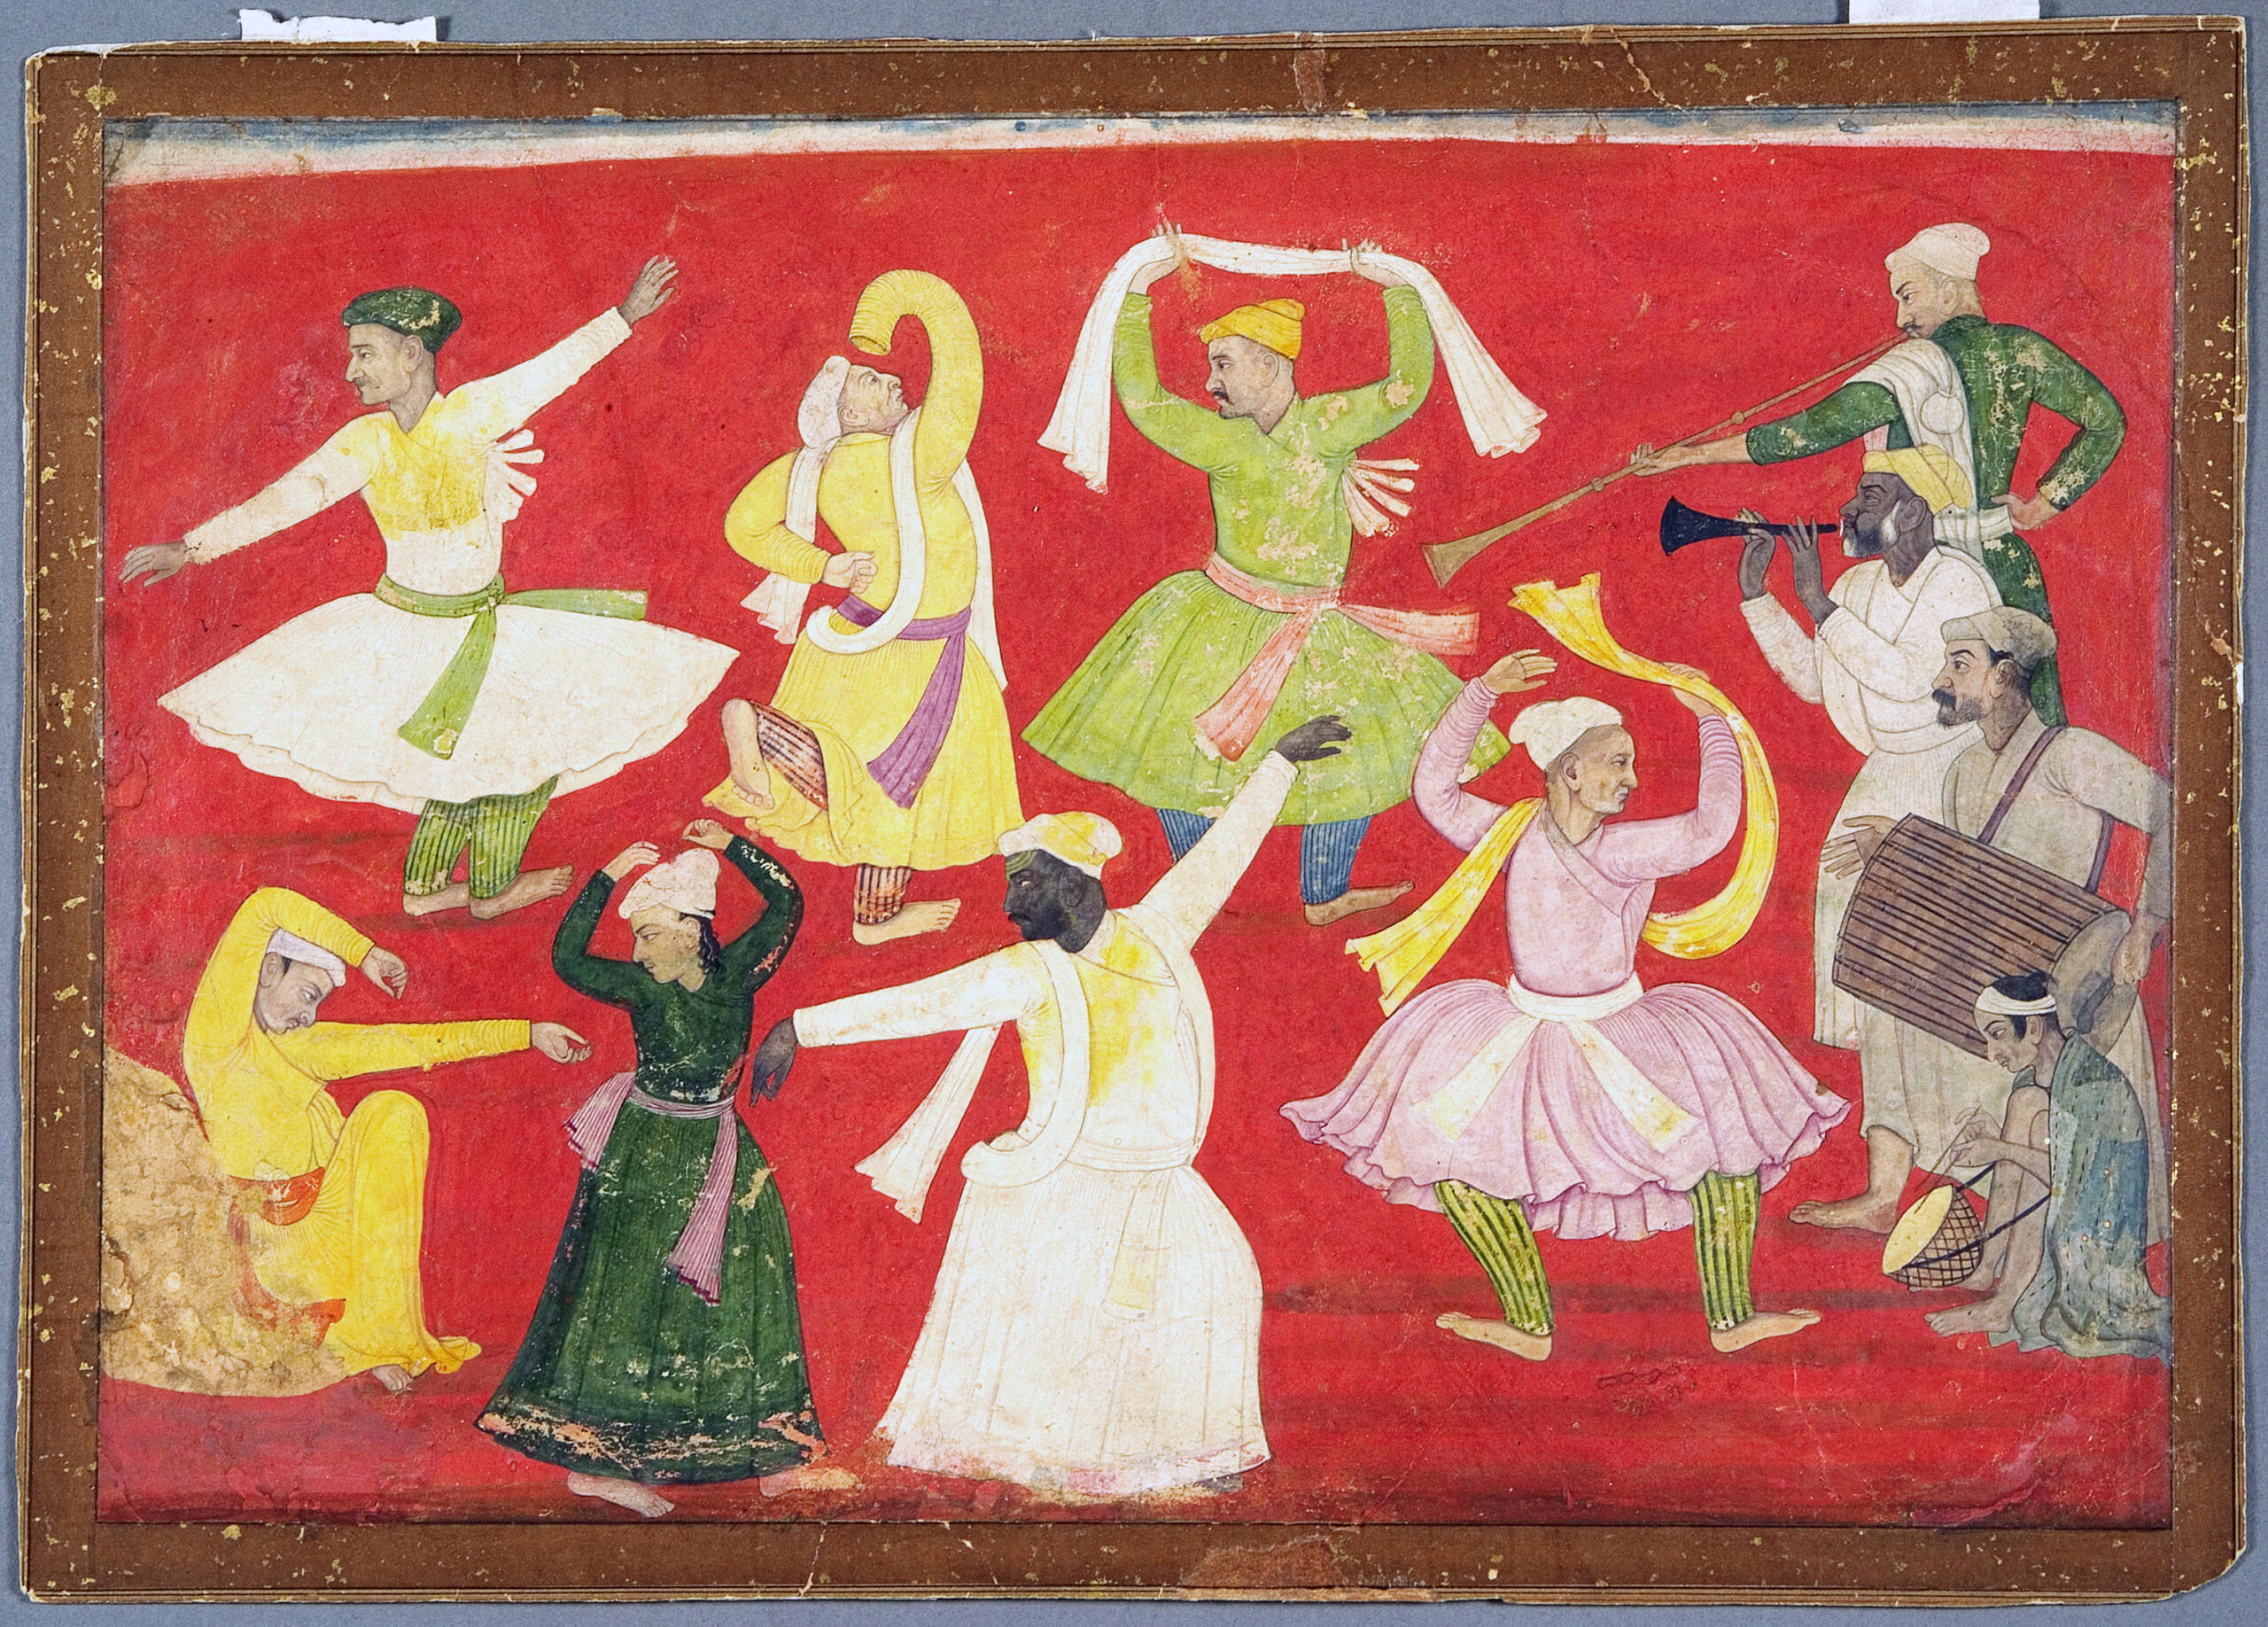 A painting in which seven male figures of various ages dance as four musicians, clustered to one side, place percussive and horn instruments. The background is painted a simple, striking red.